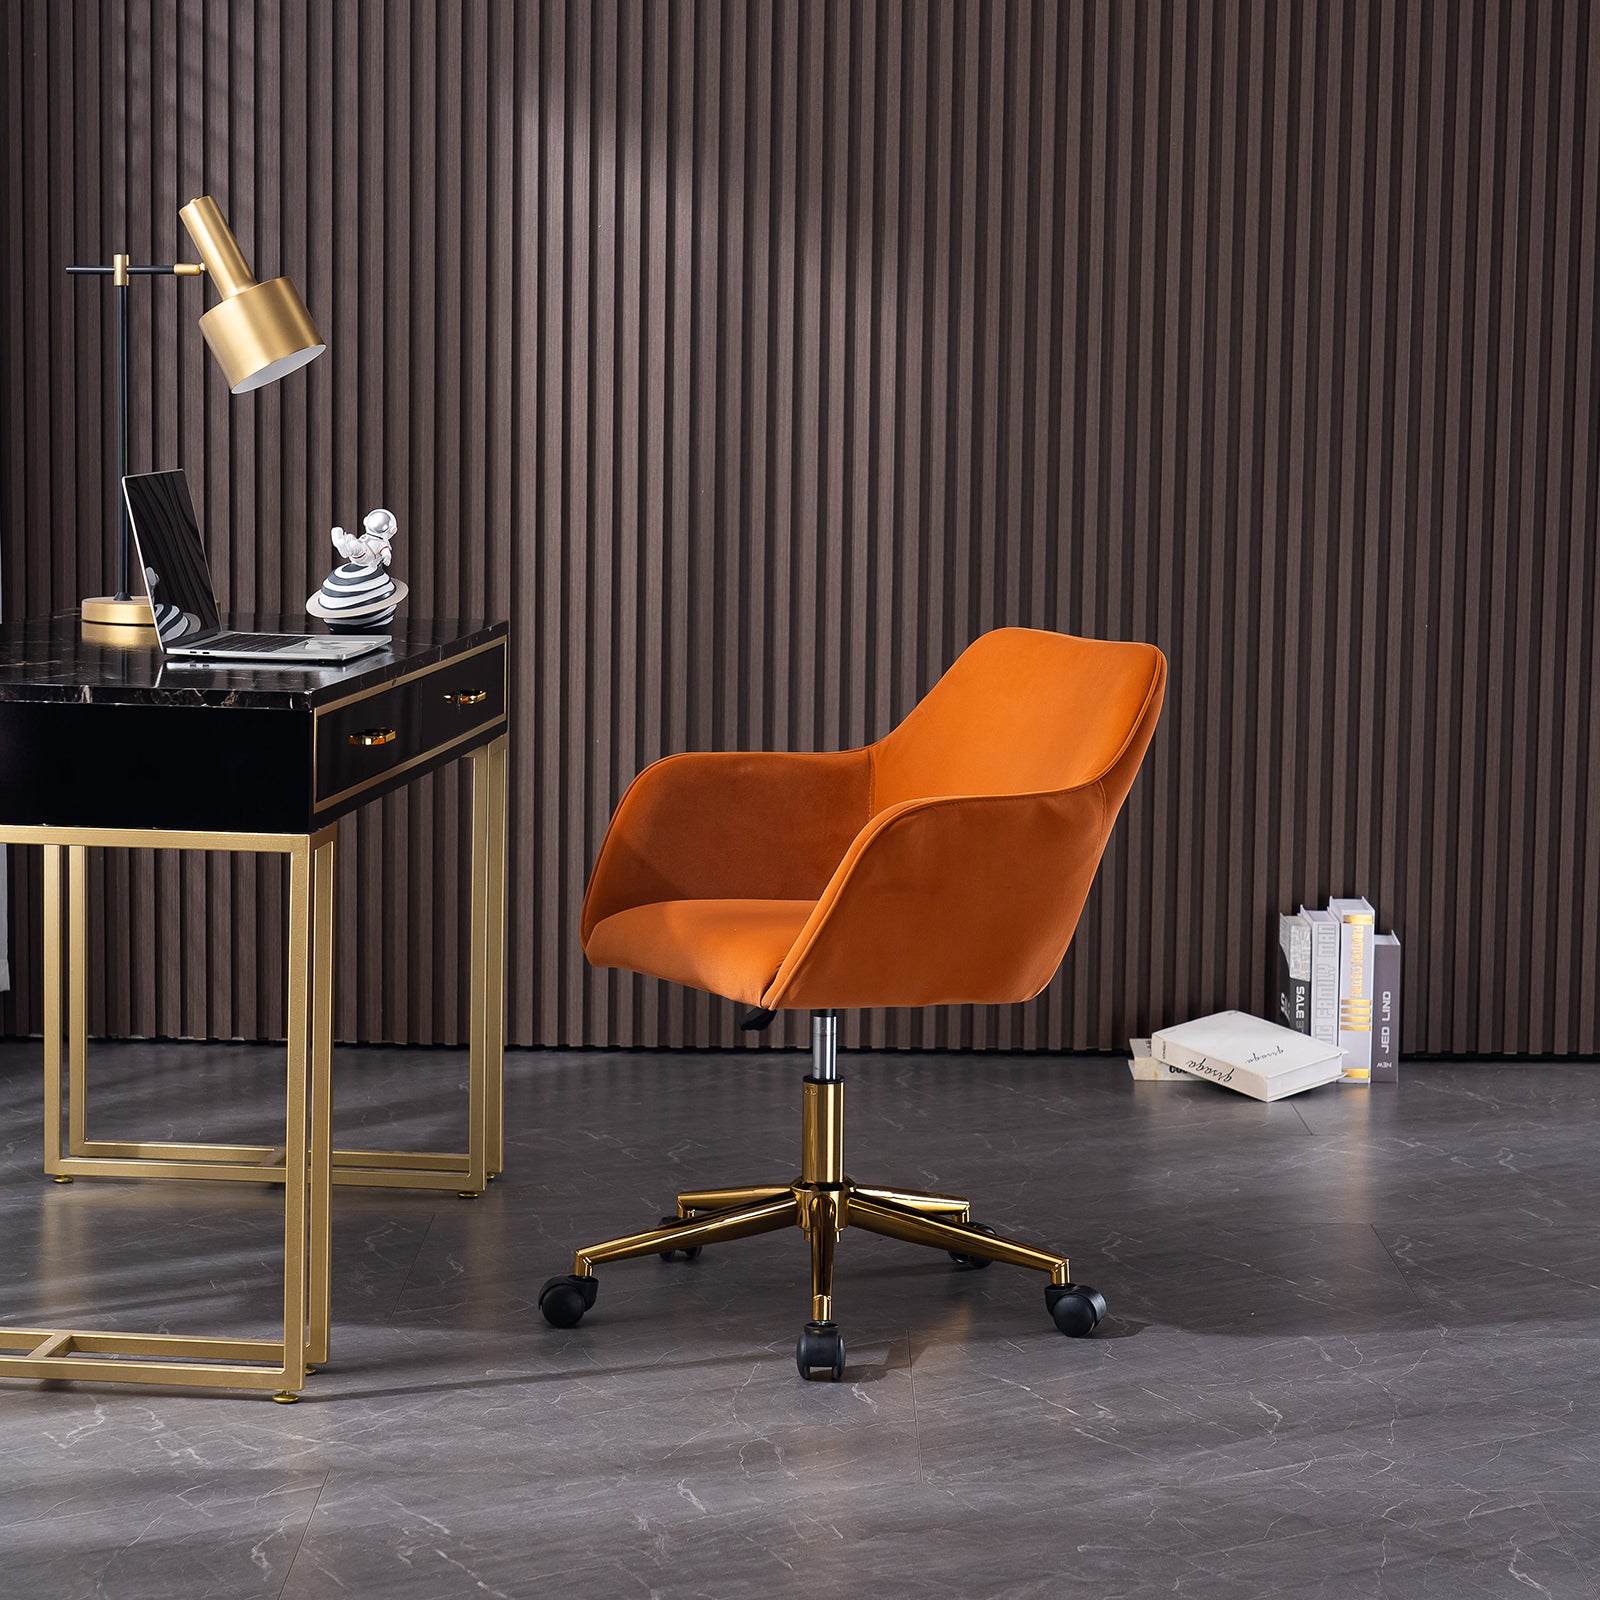 Home Office Chair with Gold Metal Legs and Universal Wheels - Orange